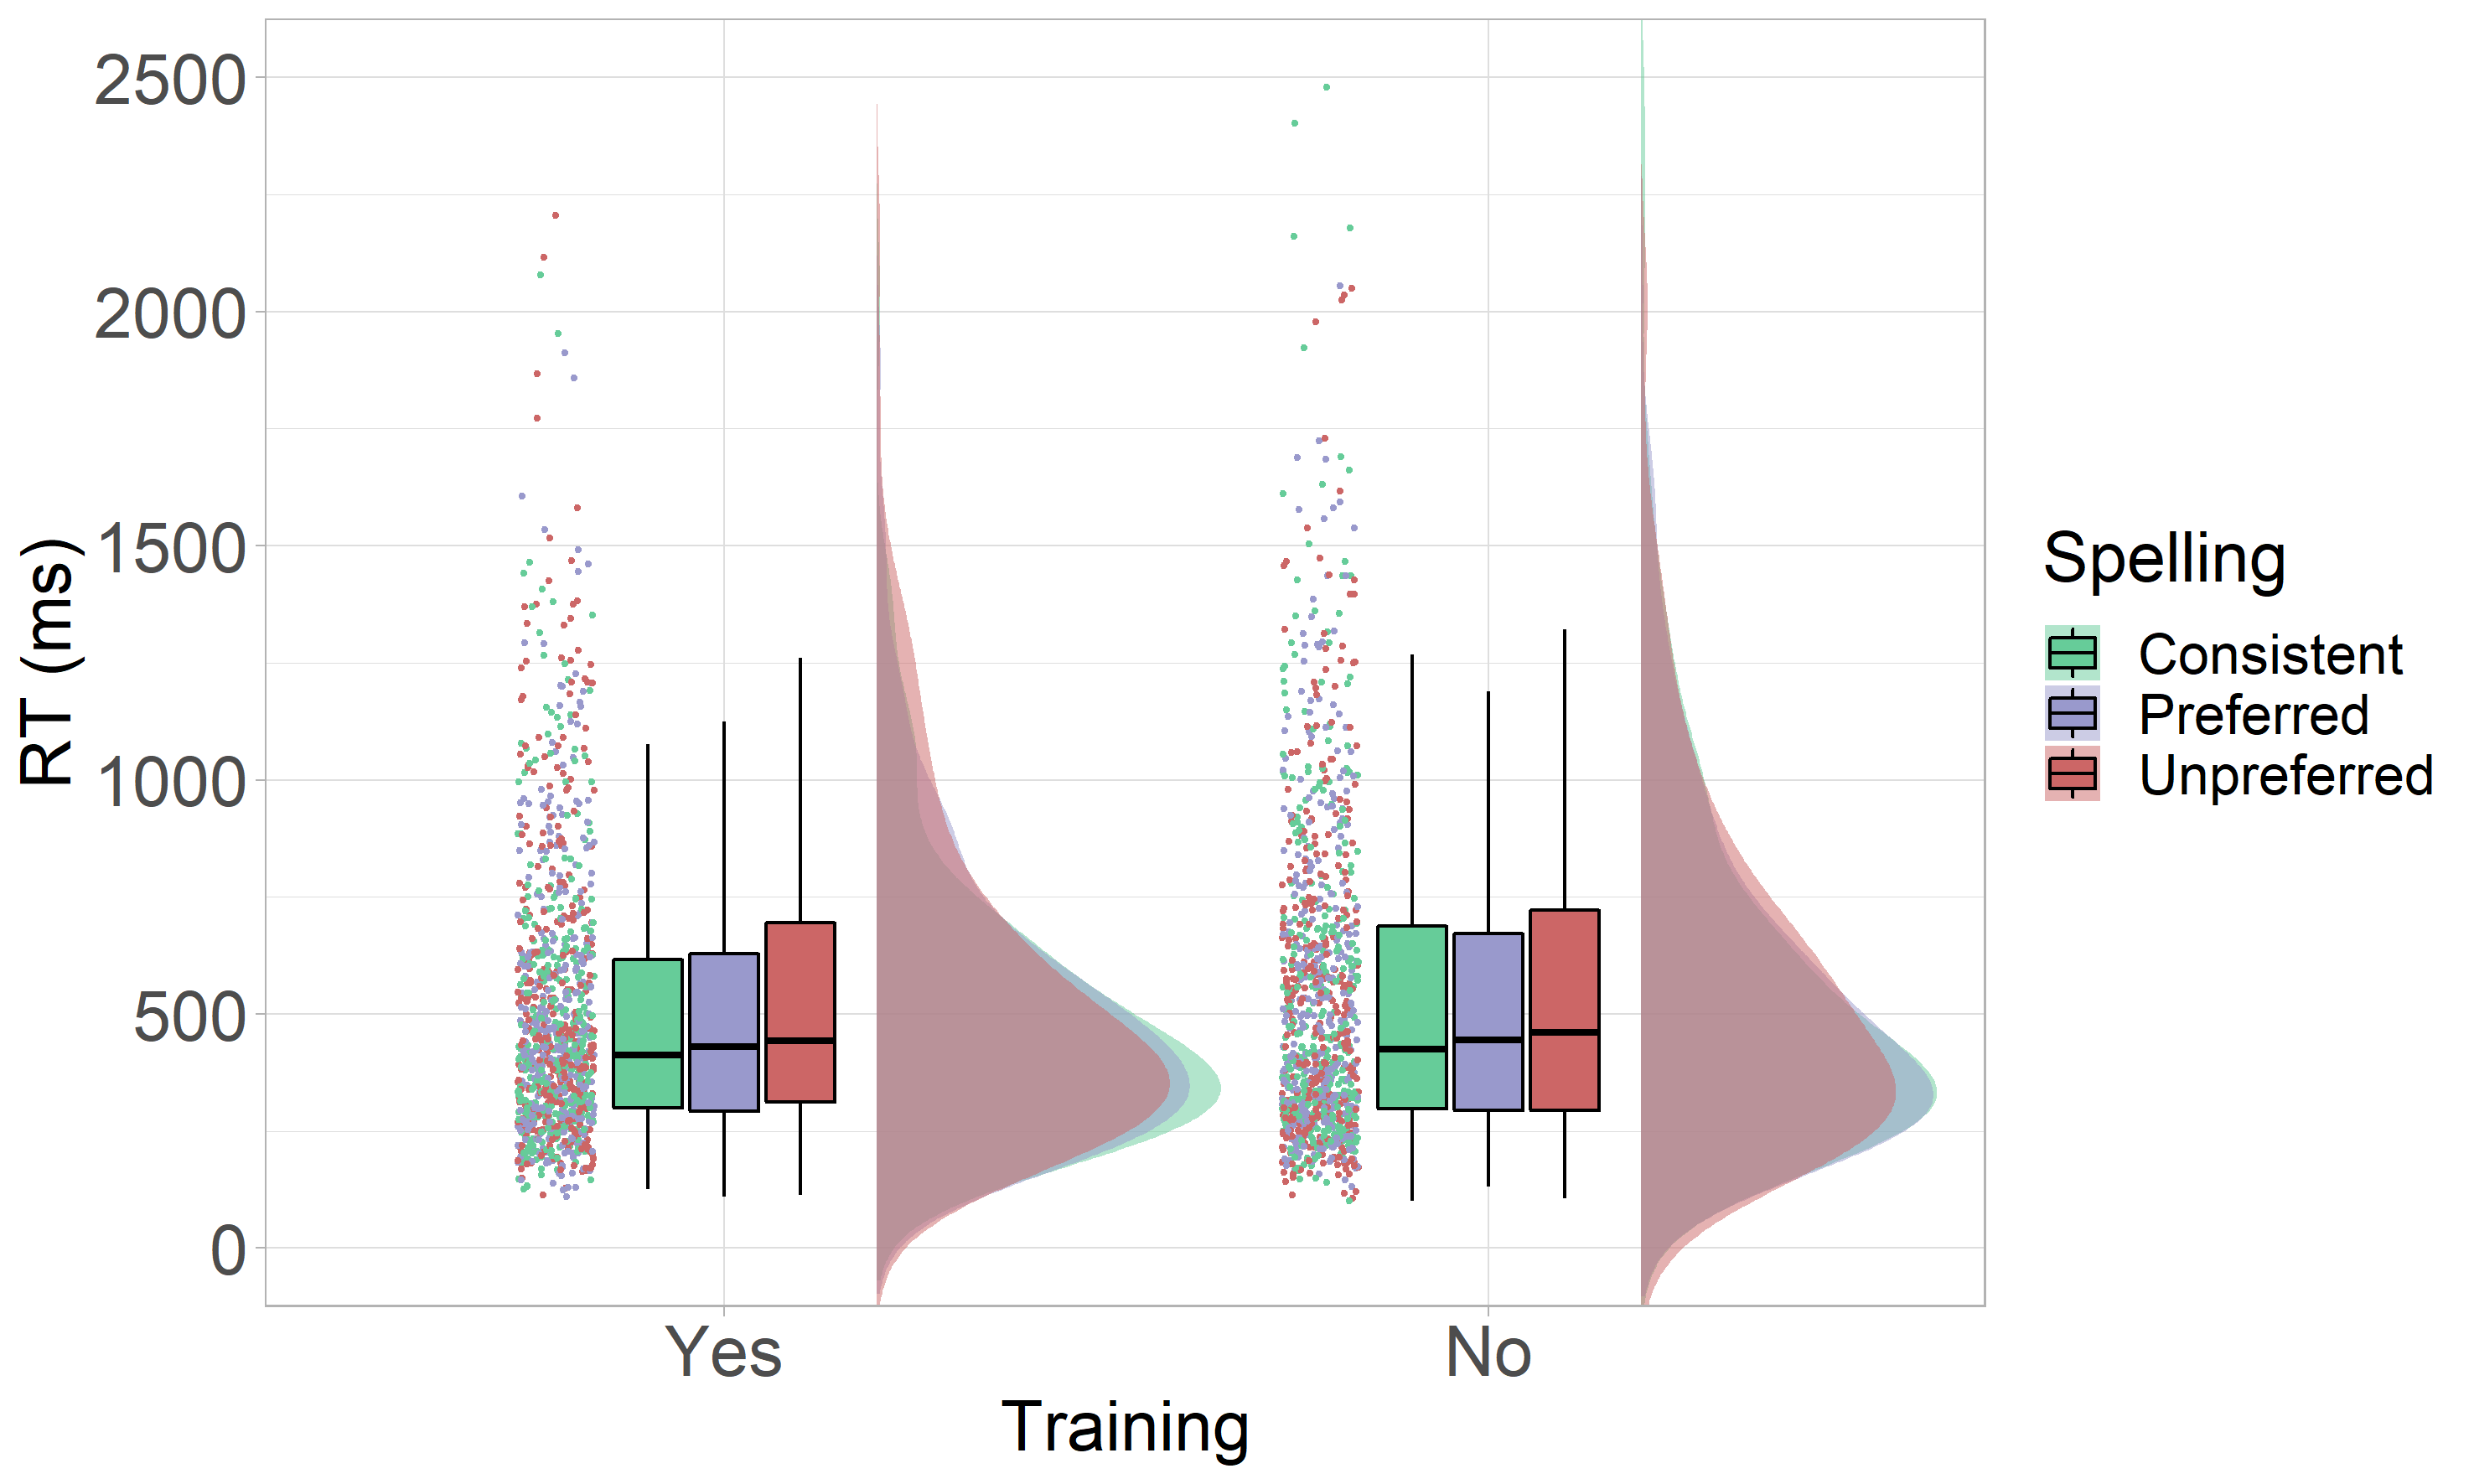 Distribution of Reaction Times From the Experiment 2. Raincloud plots showing the distribustions of RTs for both trained and untrained consistent, preferred and unpreferred spellings.